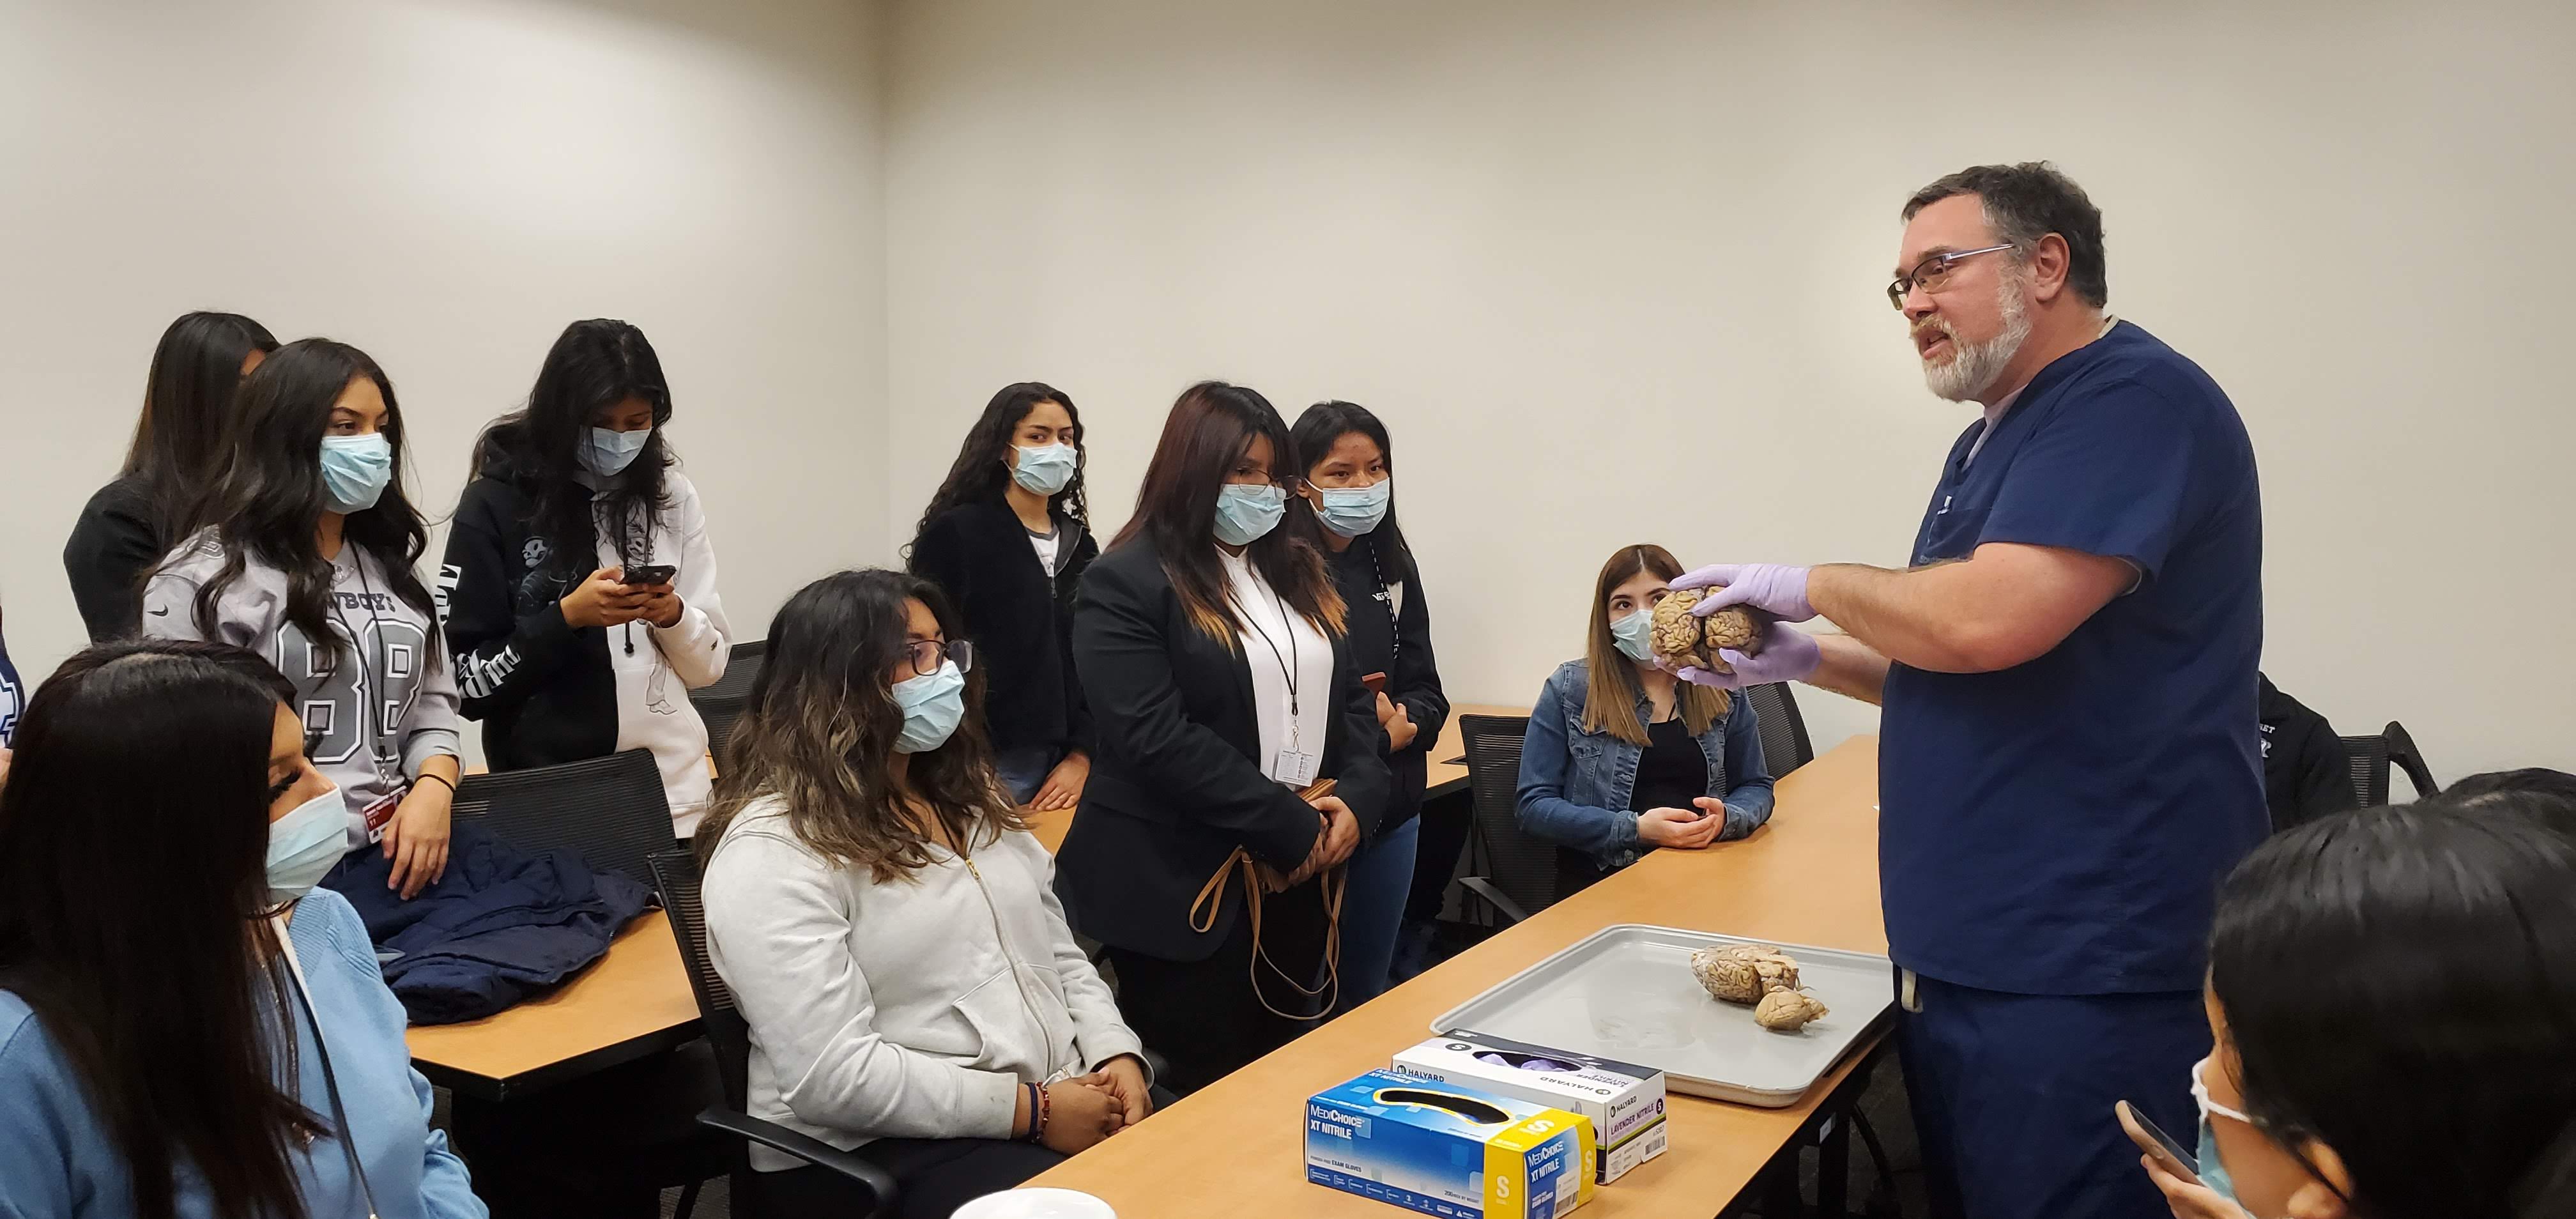 High school students learn about brain histology from neuropathologist Dr. Bret Evers